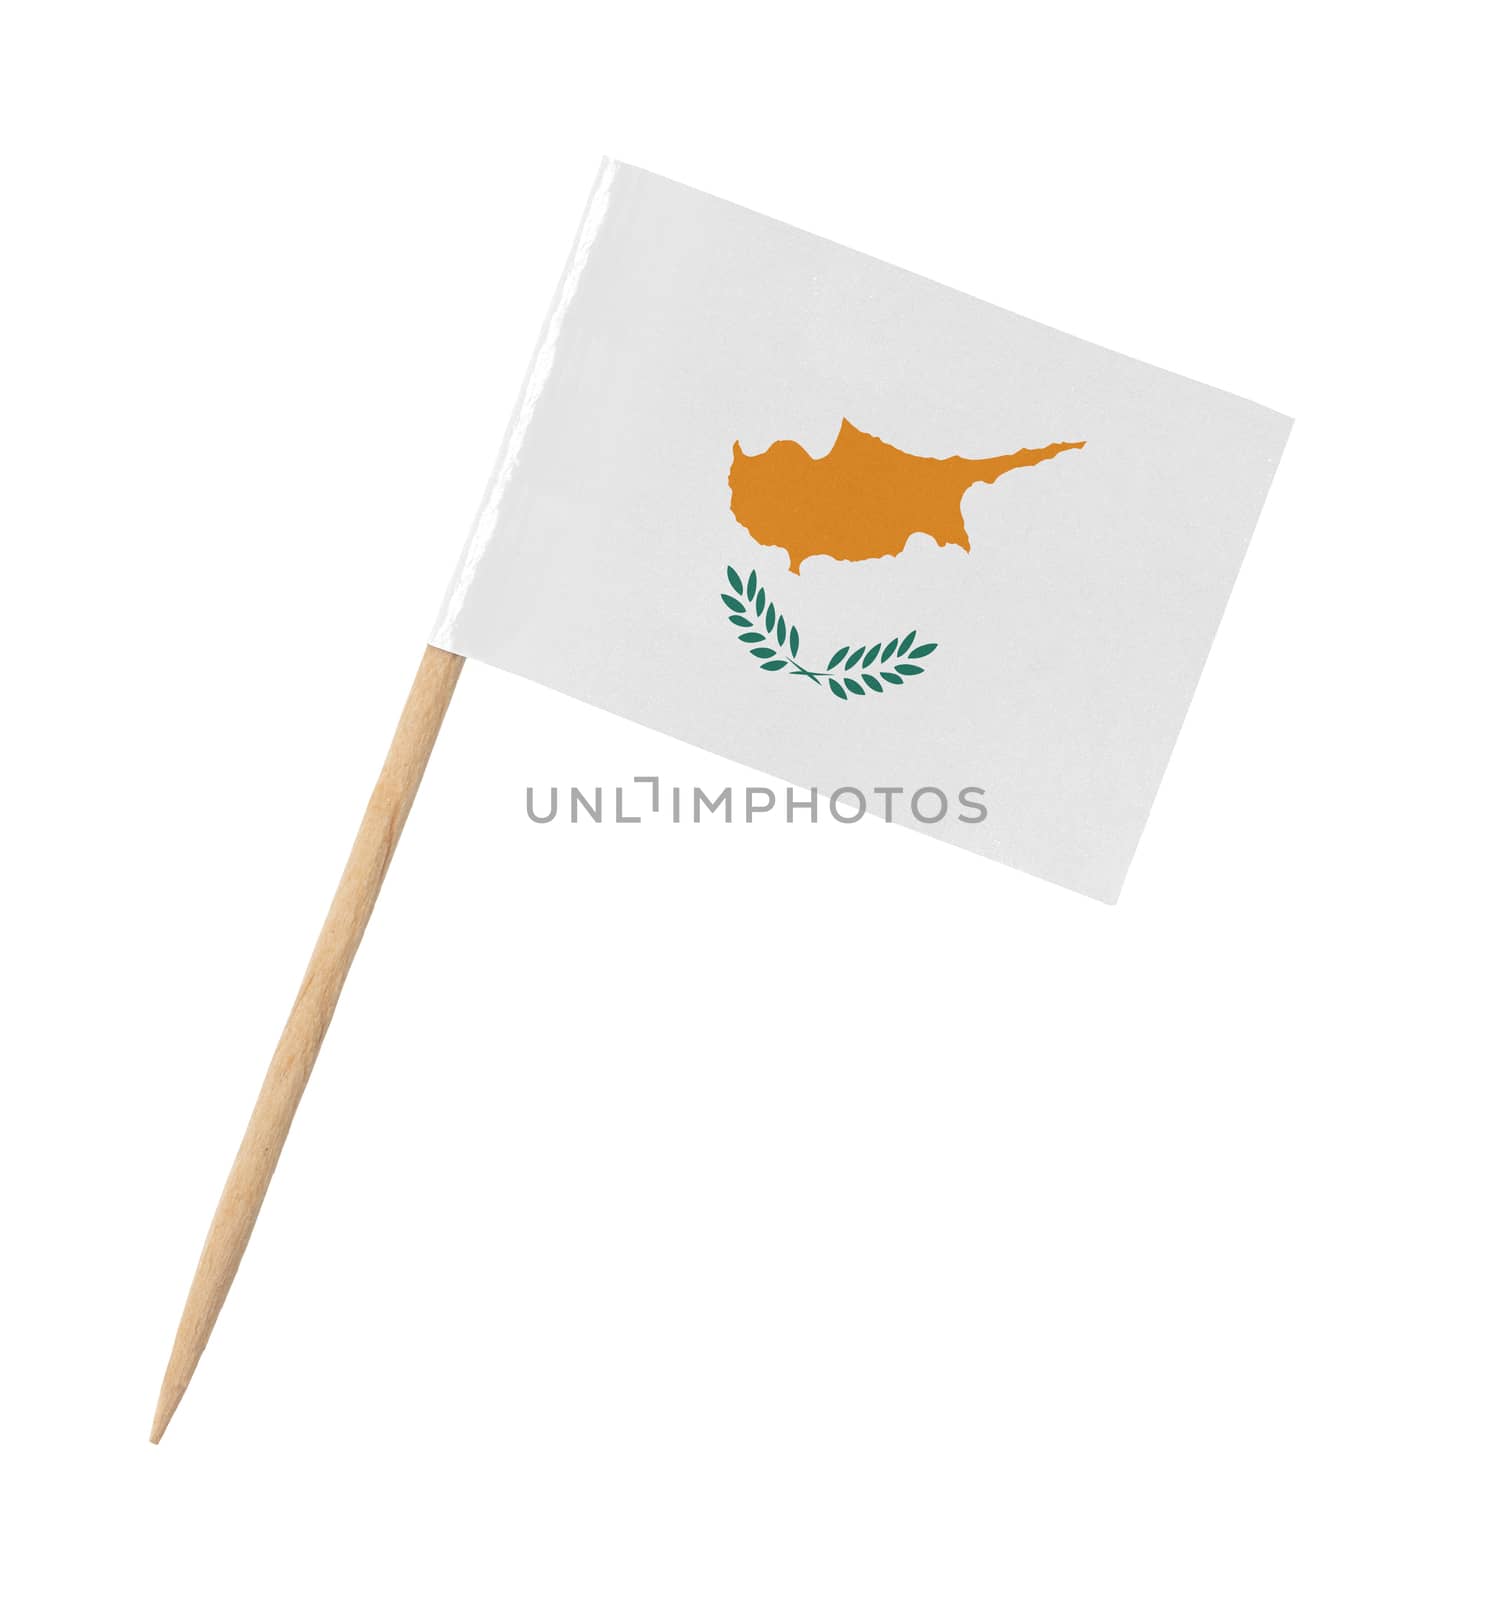 Small paper flag of Cyprus on wooden stick by michaklootwijk